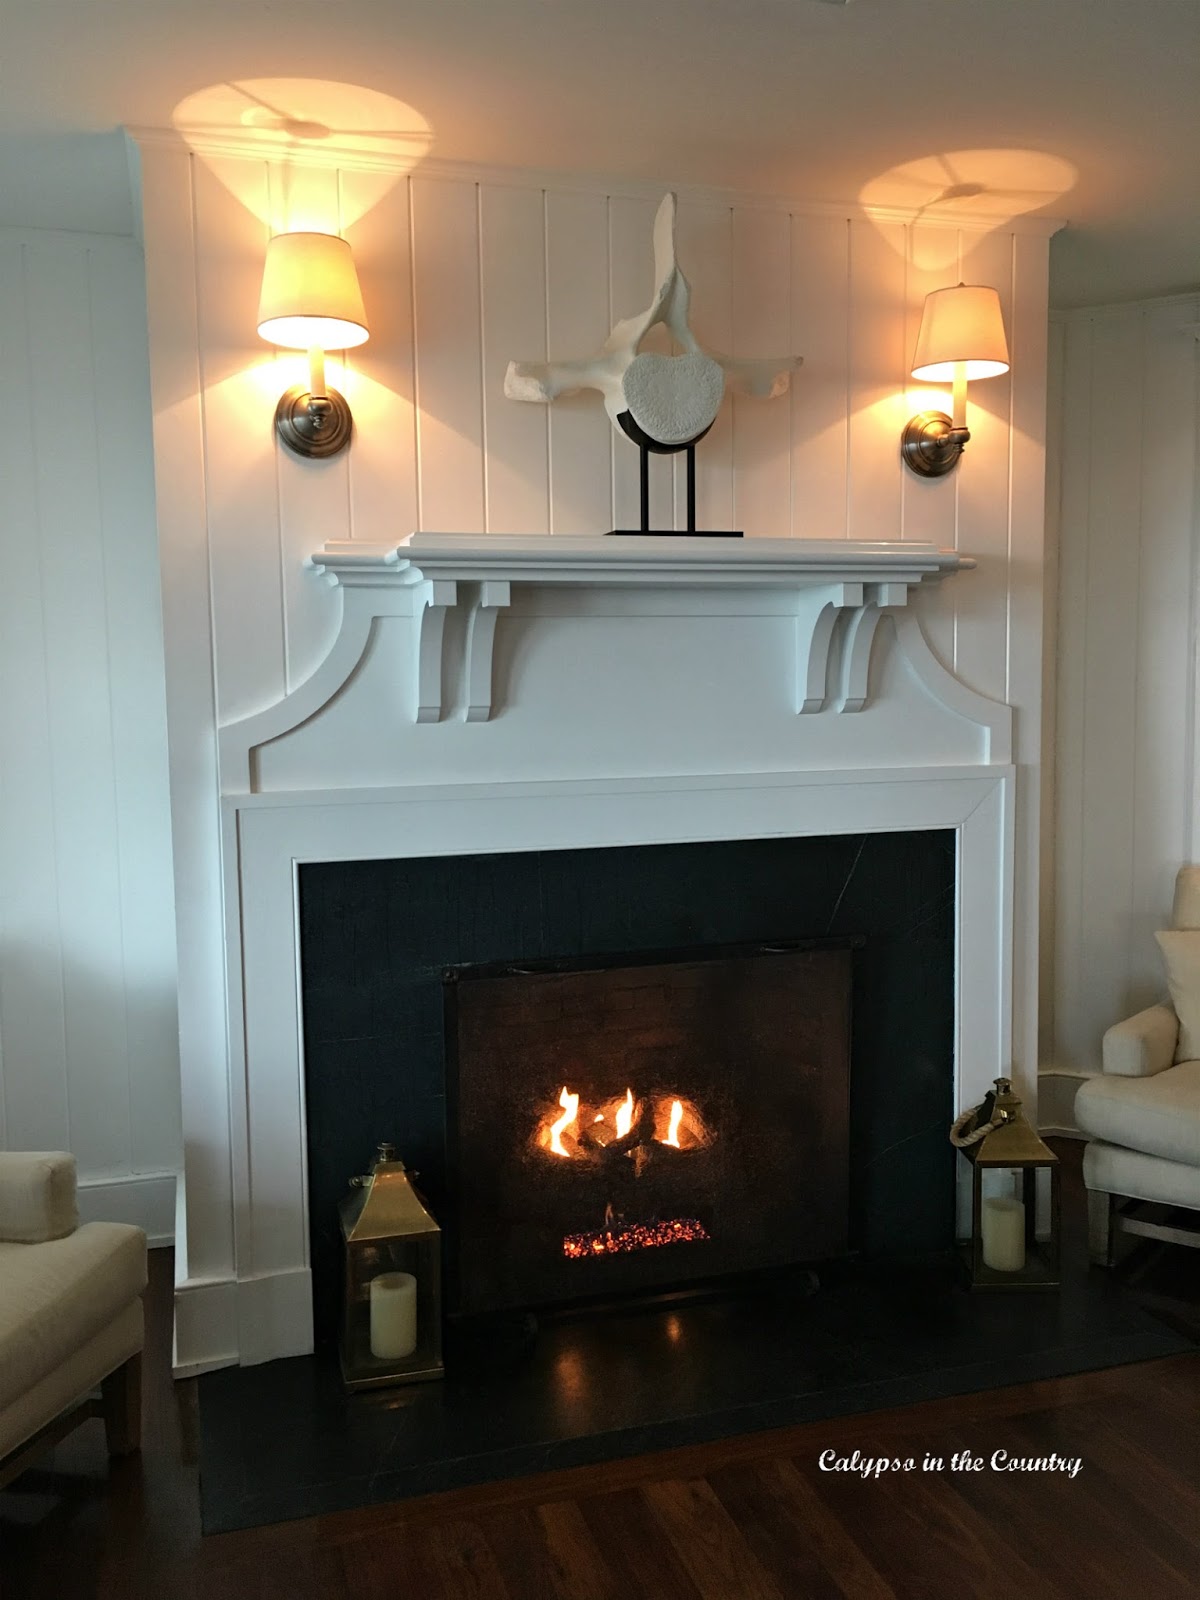 Fireplace at the Harborview Hotel in Edgartown